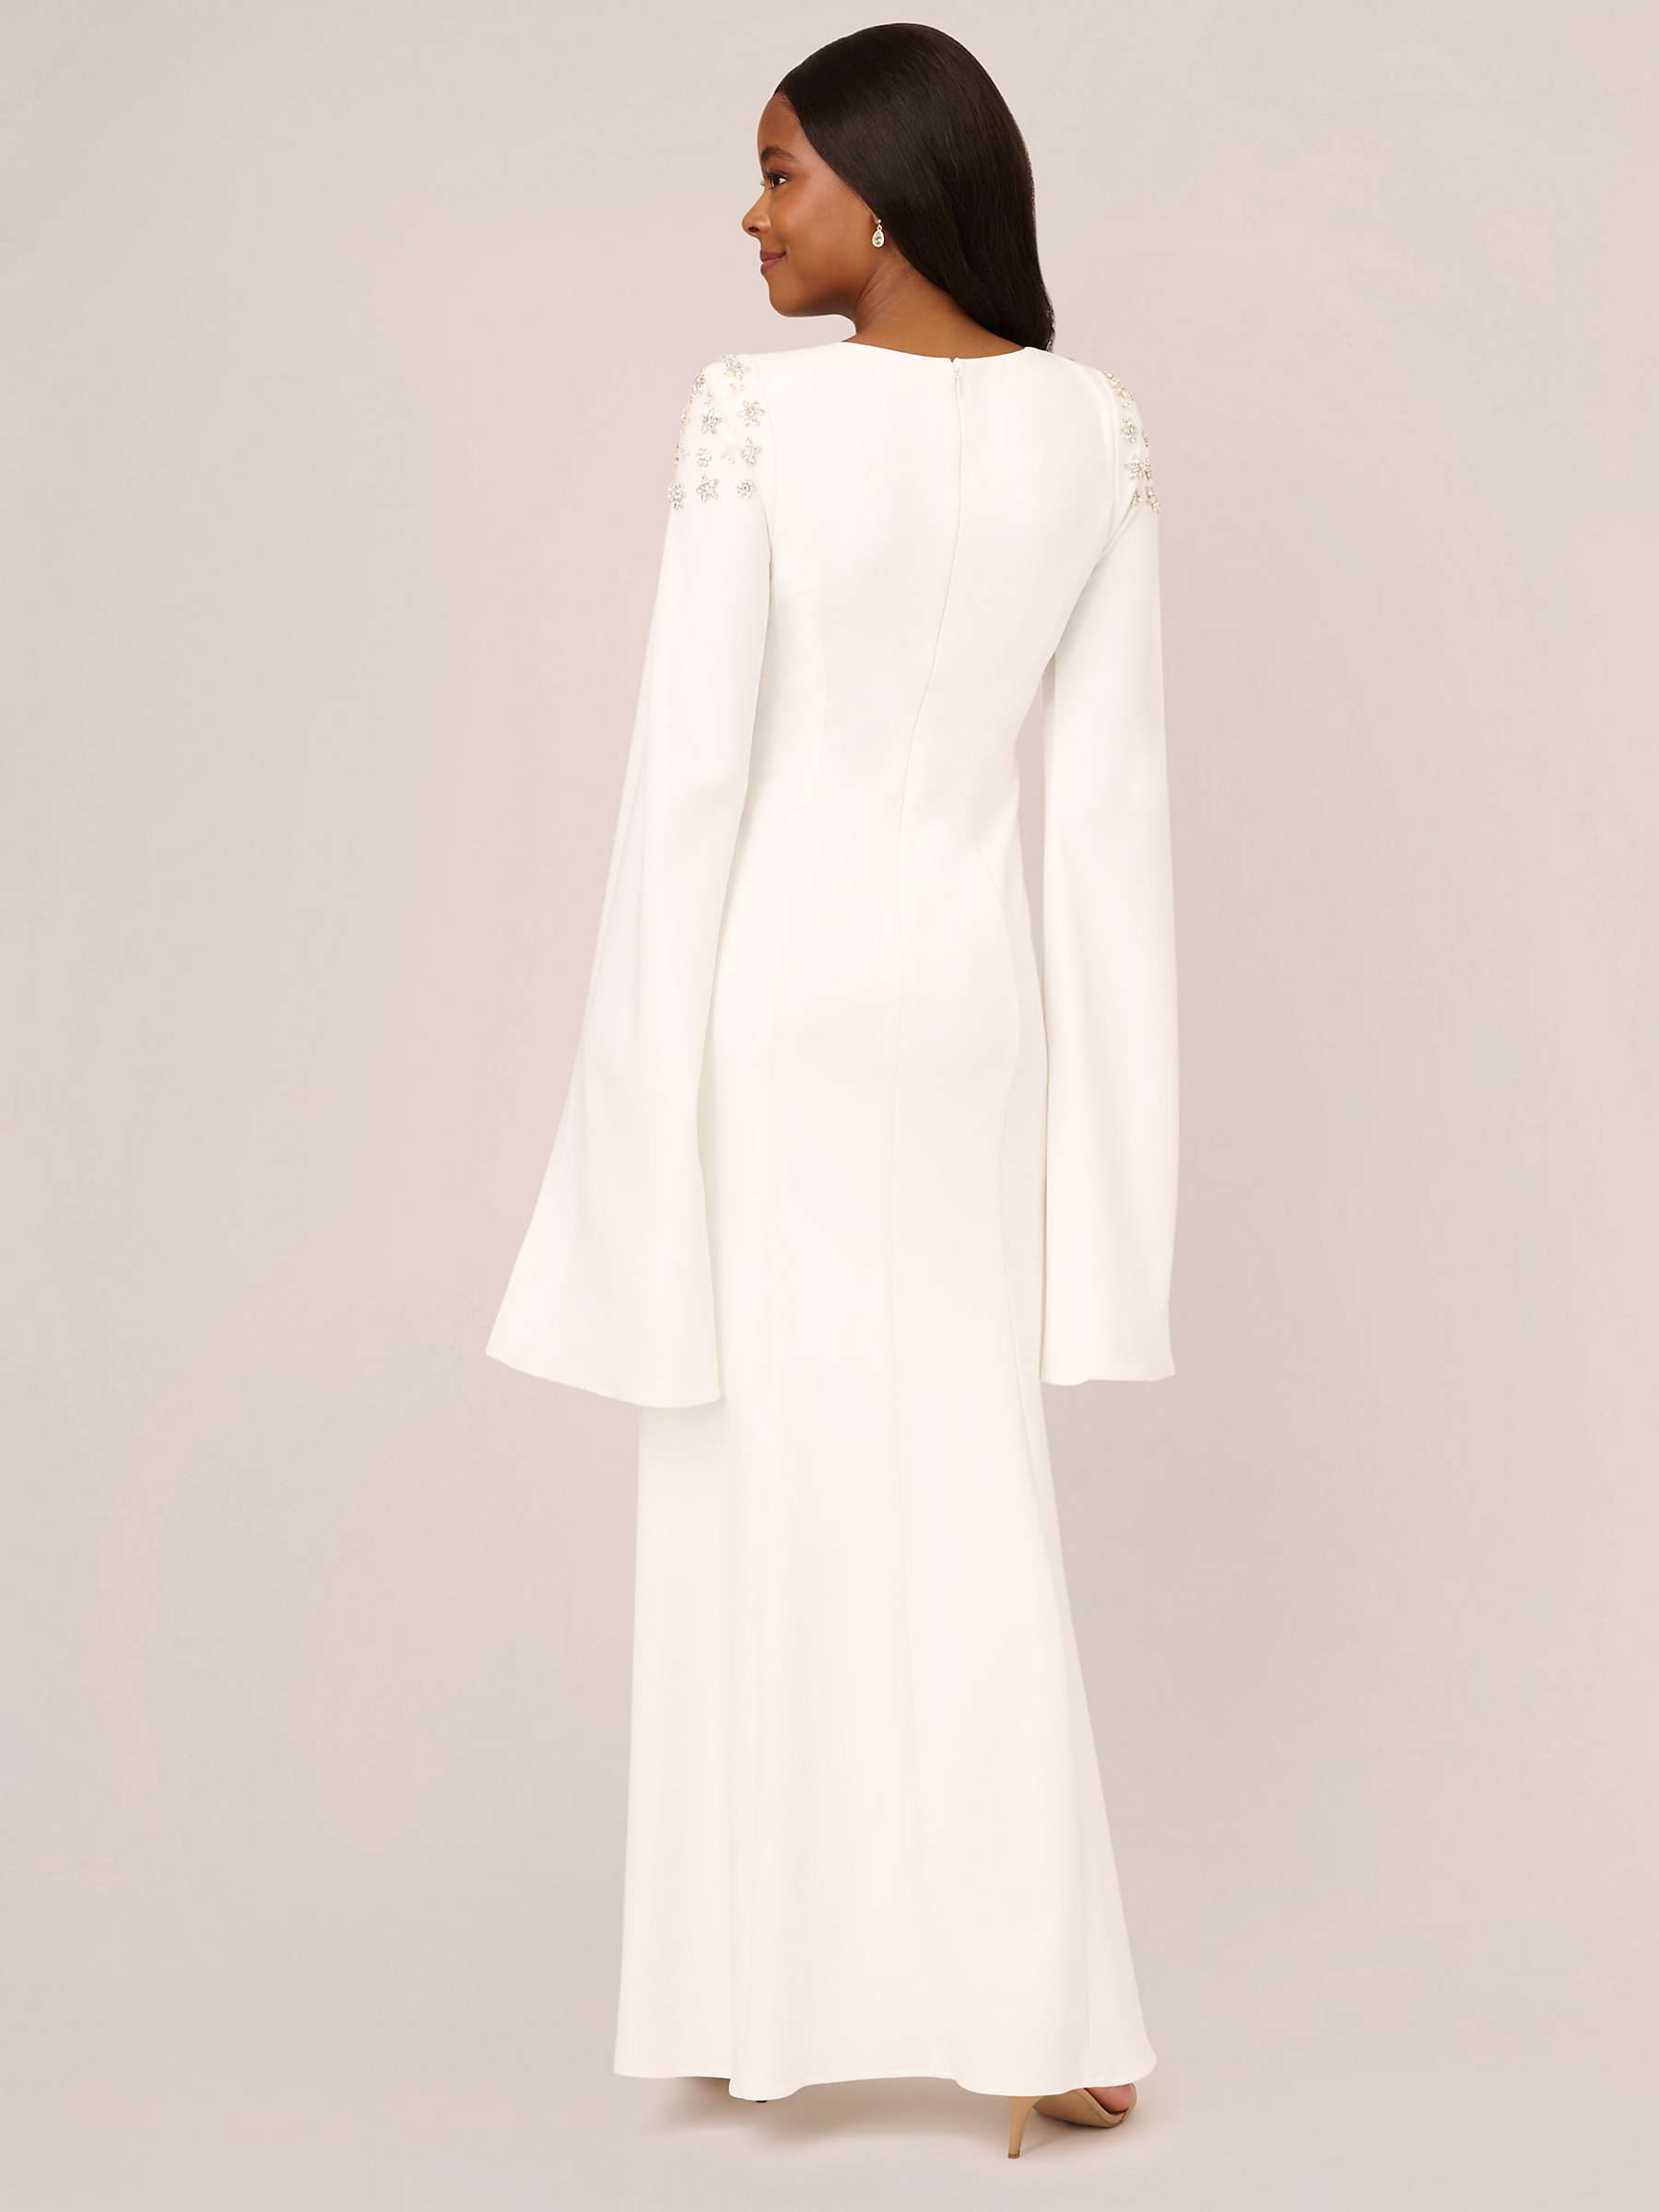 Adrianna Papell Crepe Beaded Cape Sleeve Gown, Ivory at John Lewis ...